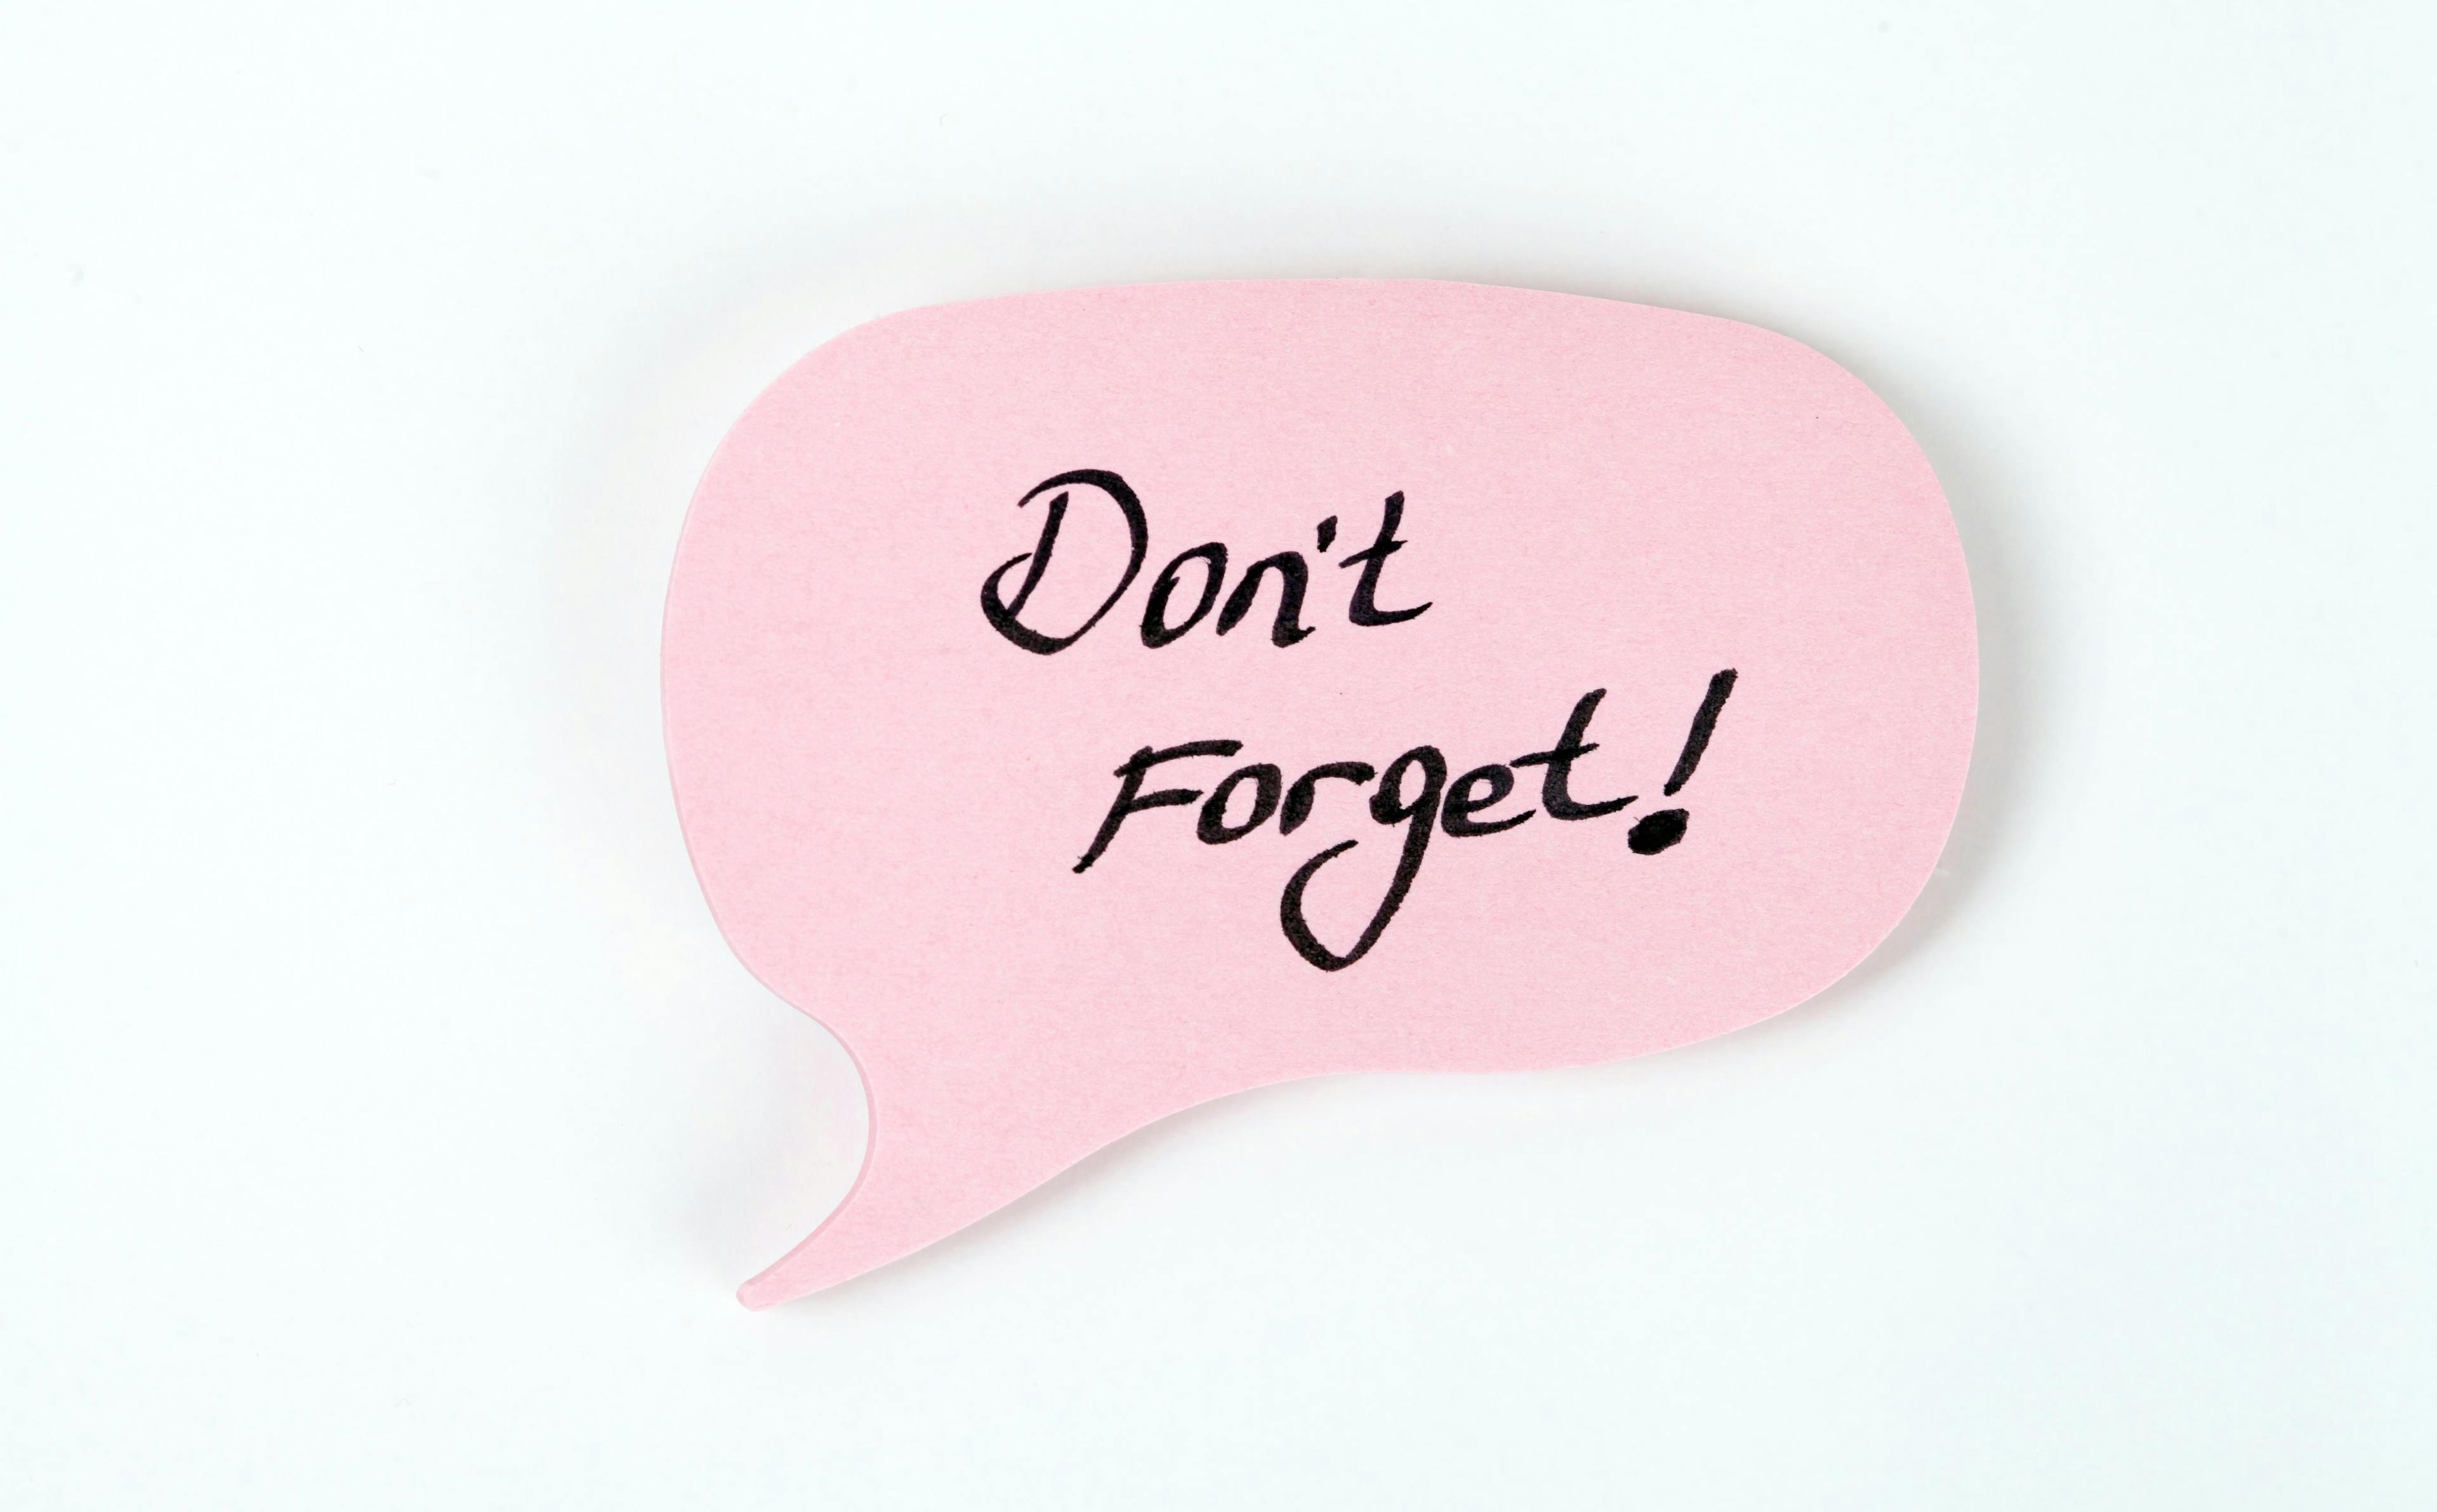 Speech bubble with the words "Don't Forget" inside